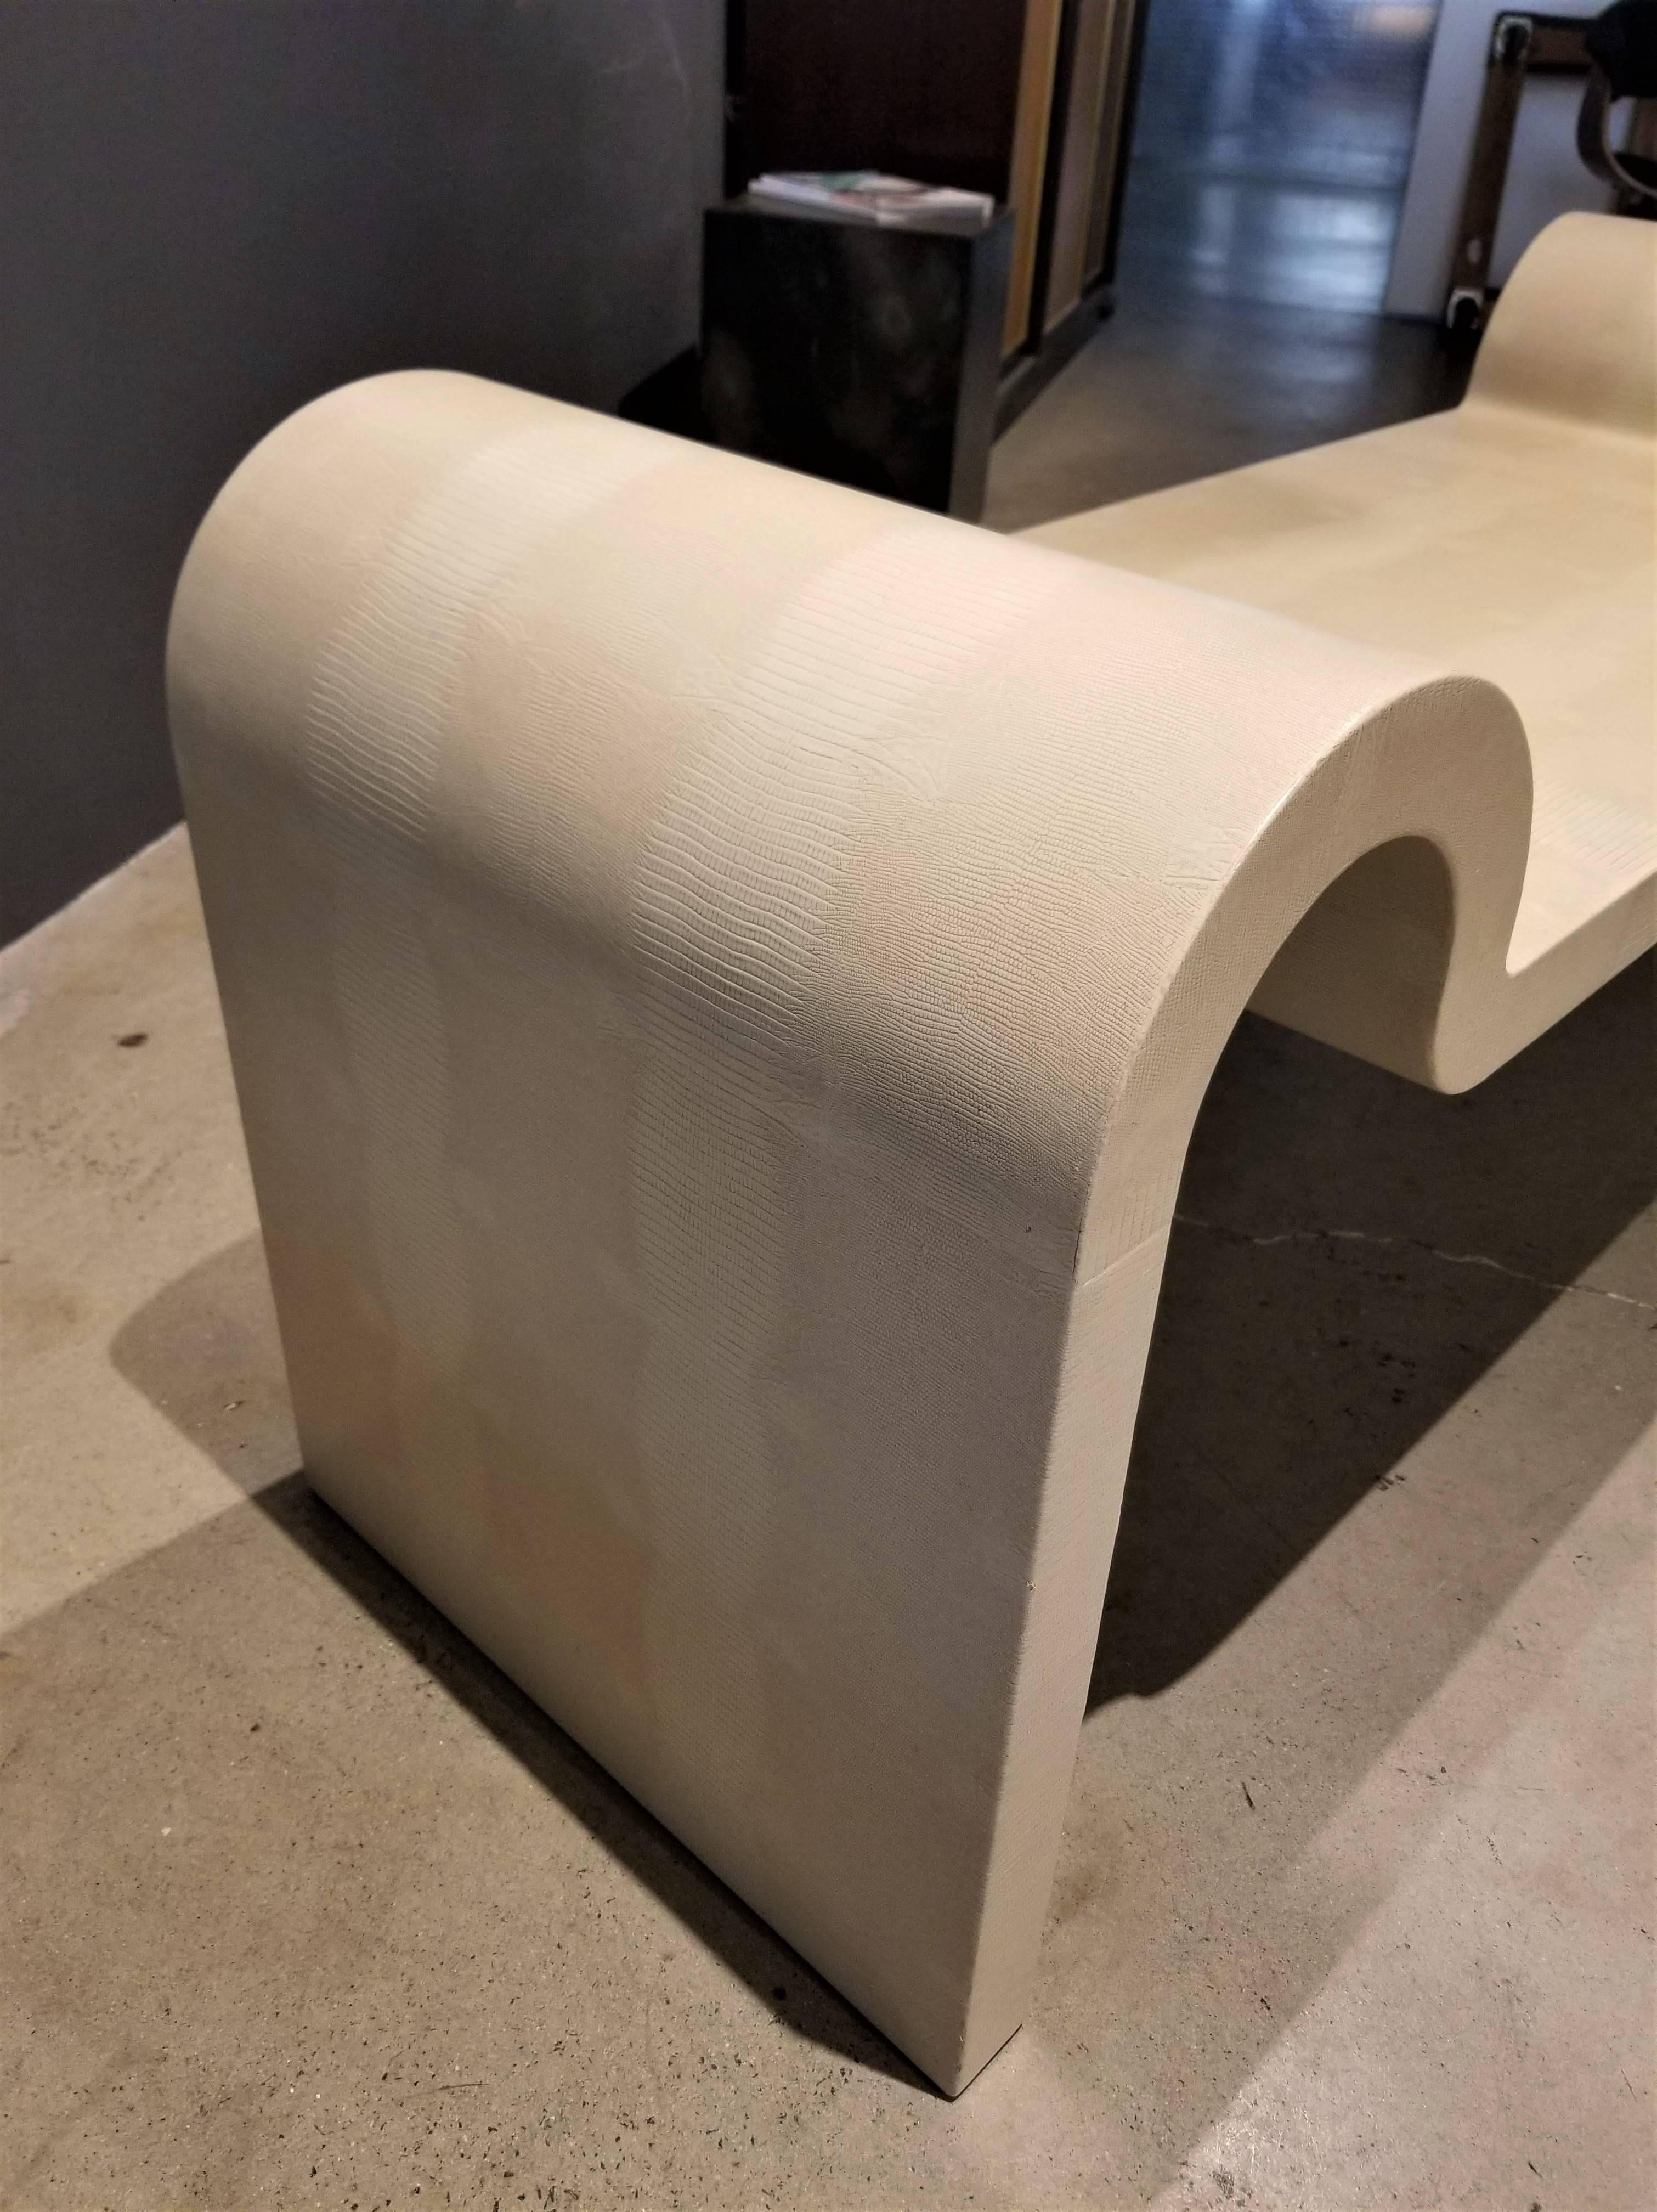 We are pleased to offer this iconic Karl Springer sculptural curved bench wrapped in cream colored lizard embossed leather. Signed and dated 1989. Excellent vintage condition with very few signs of wear. See detail images.

See this item at our